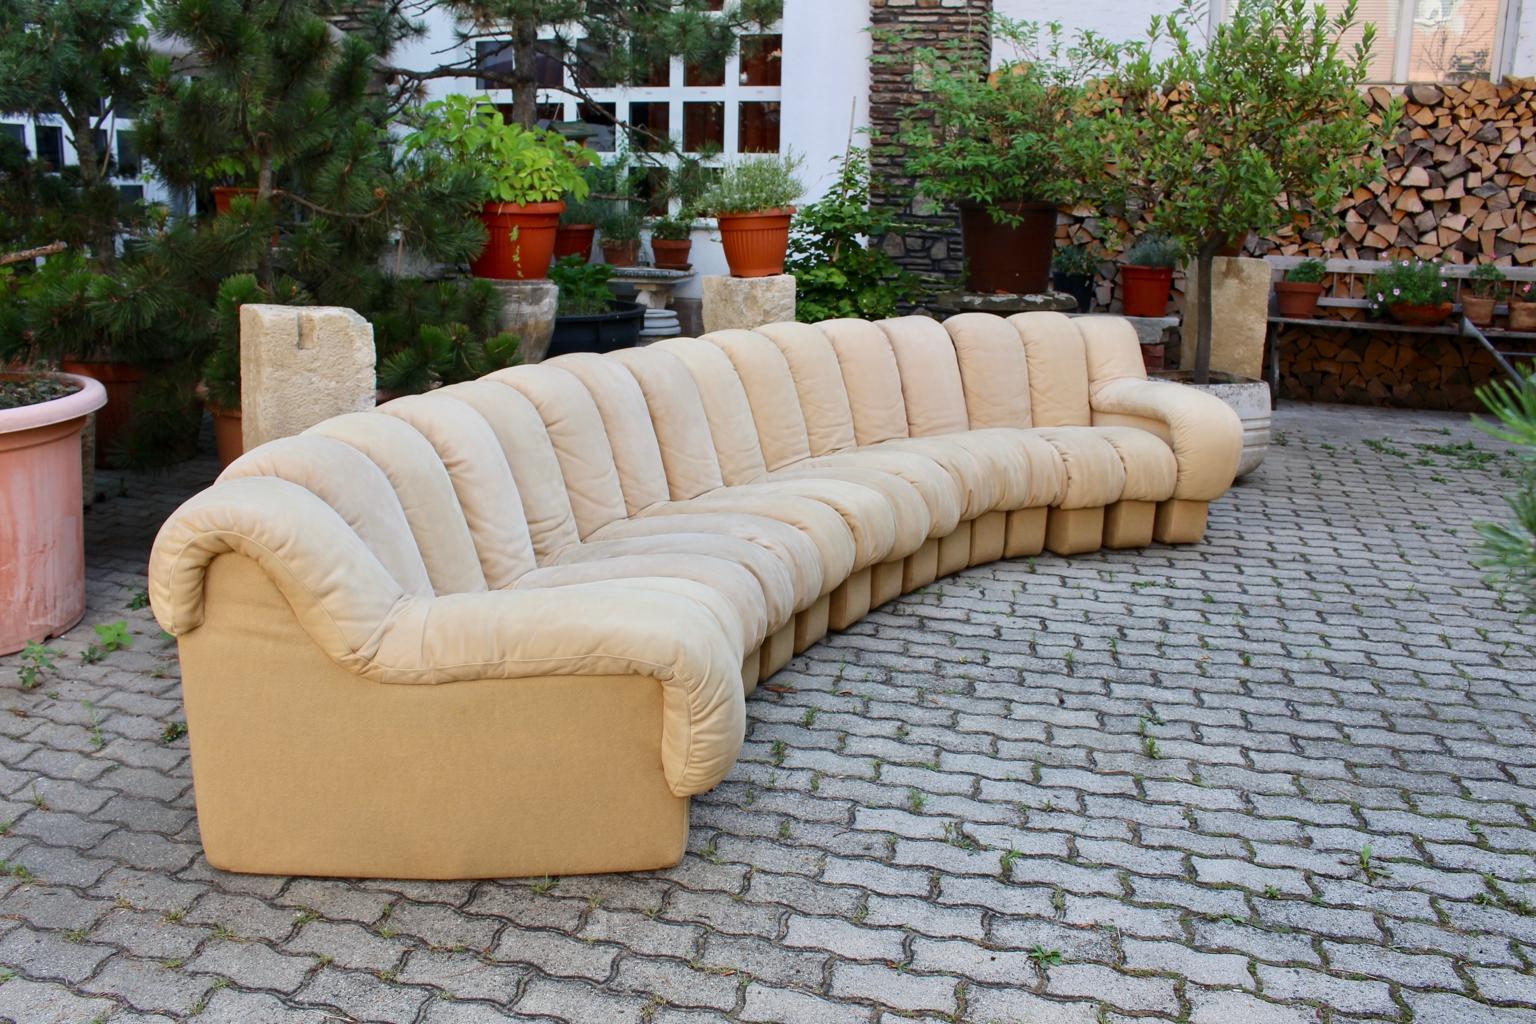 This presented 16 section De Sede DS -600 never ending beige suede leather sofa was designed in the early 1970s by Ueli Berger, Eleonore Peduzzi-Riva, Heinz Ulrich and Klaus Vogt and executed by De Sede, Switzerland.
The vintage suede leather sofa